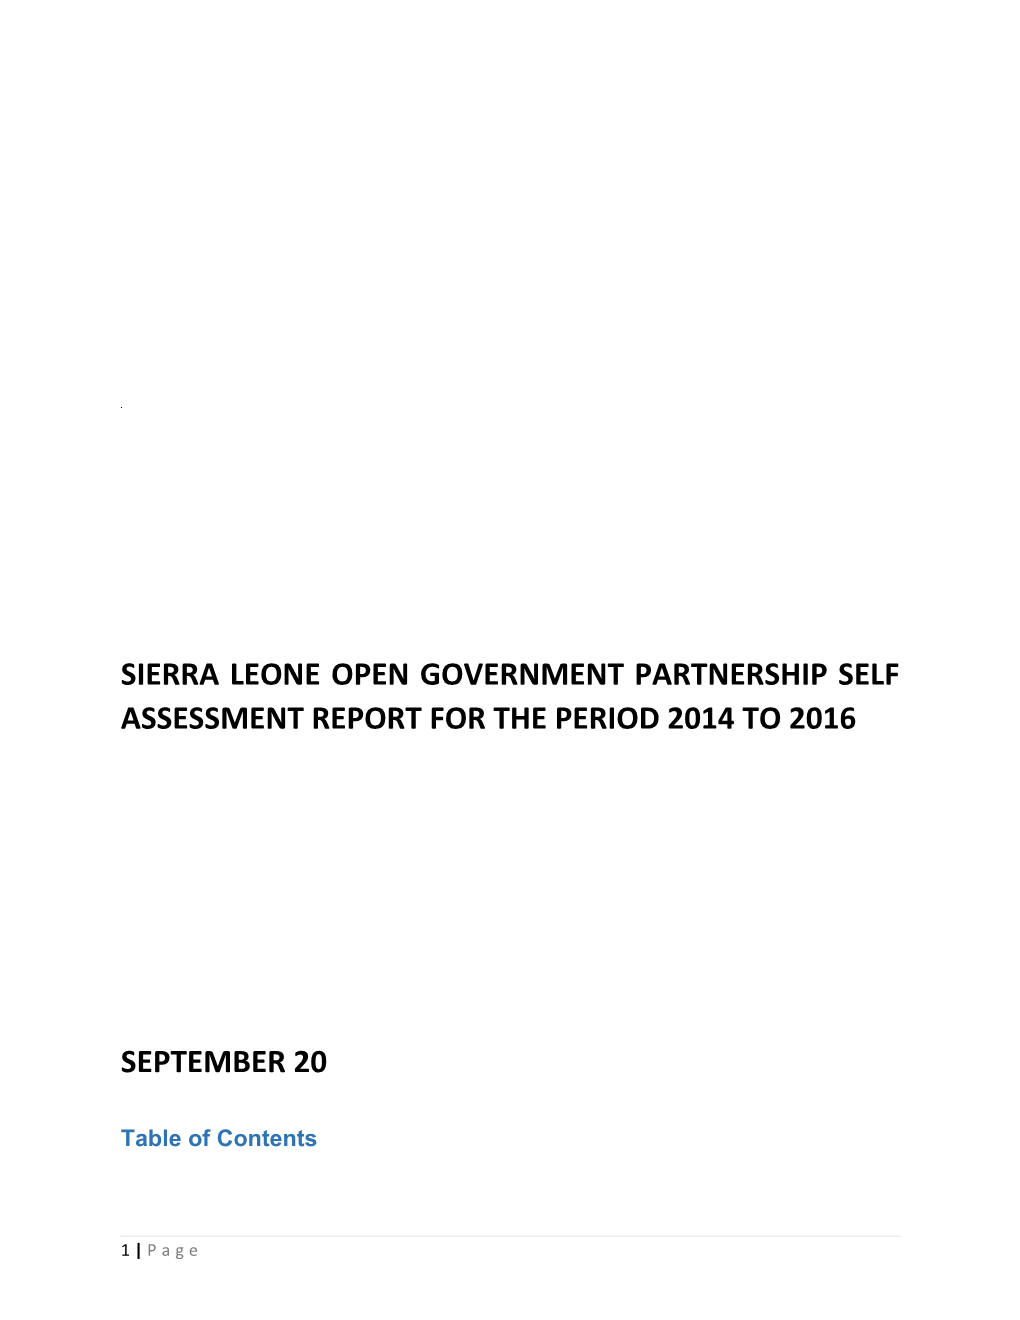 Sierra Leone Open Government Partnership Self Assessment Report for the Period 2014 to 2016